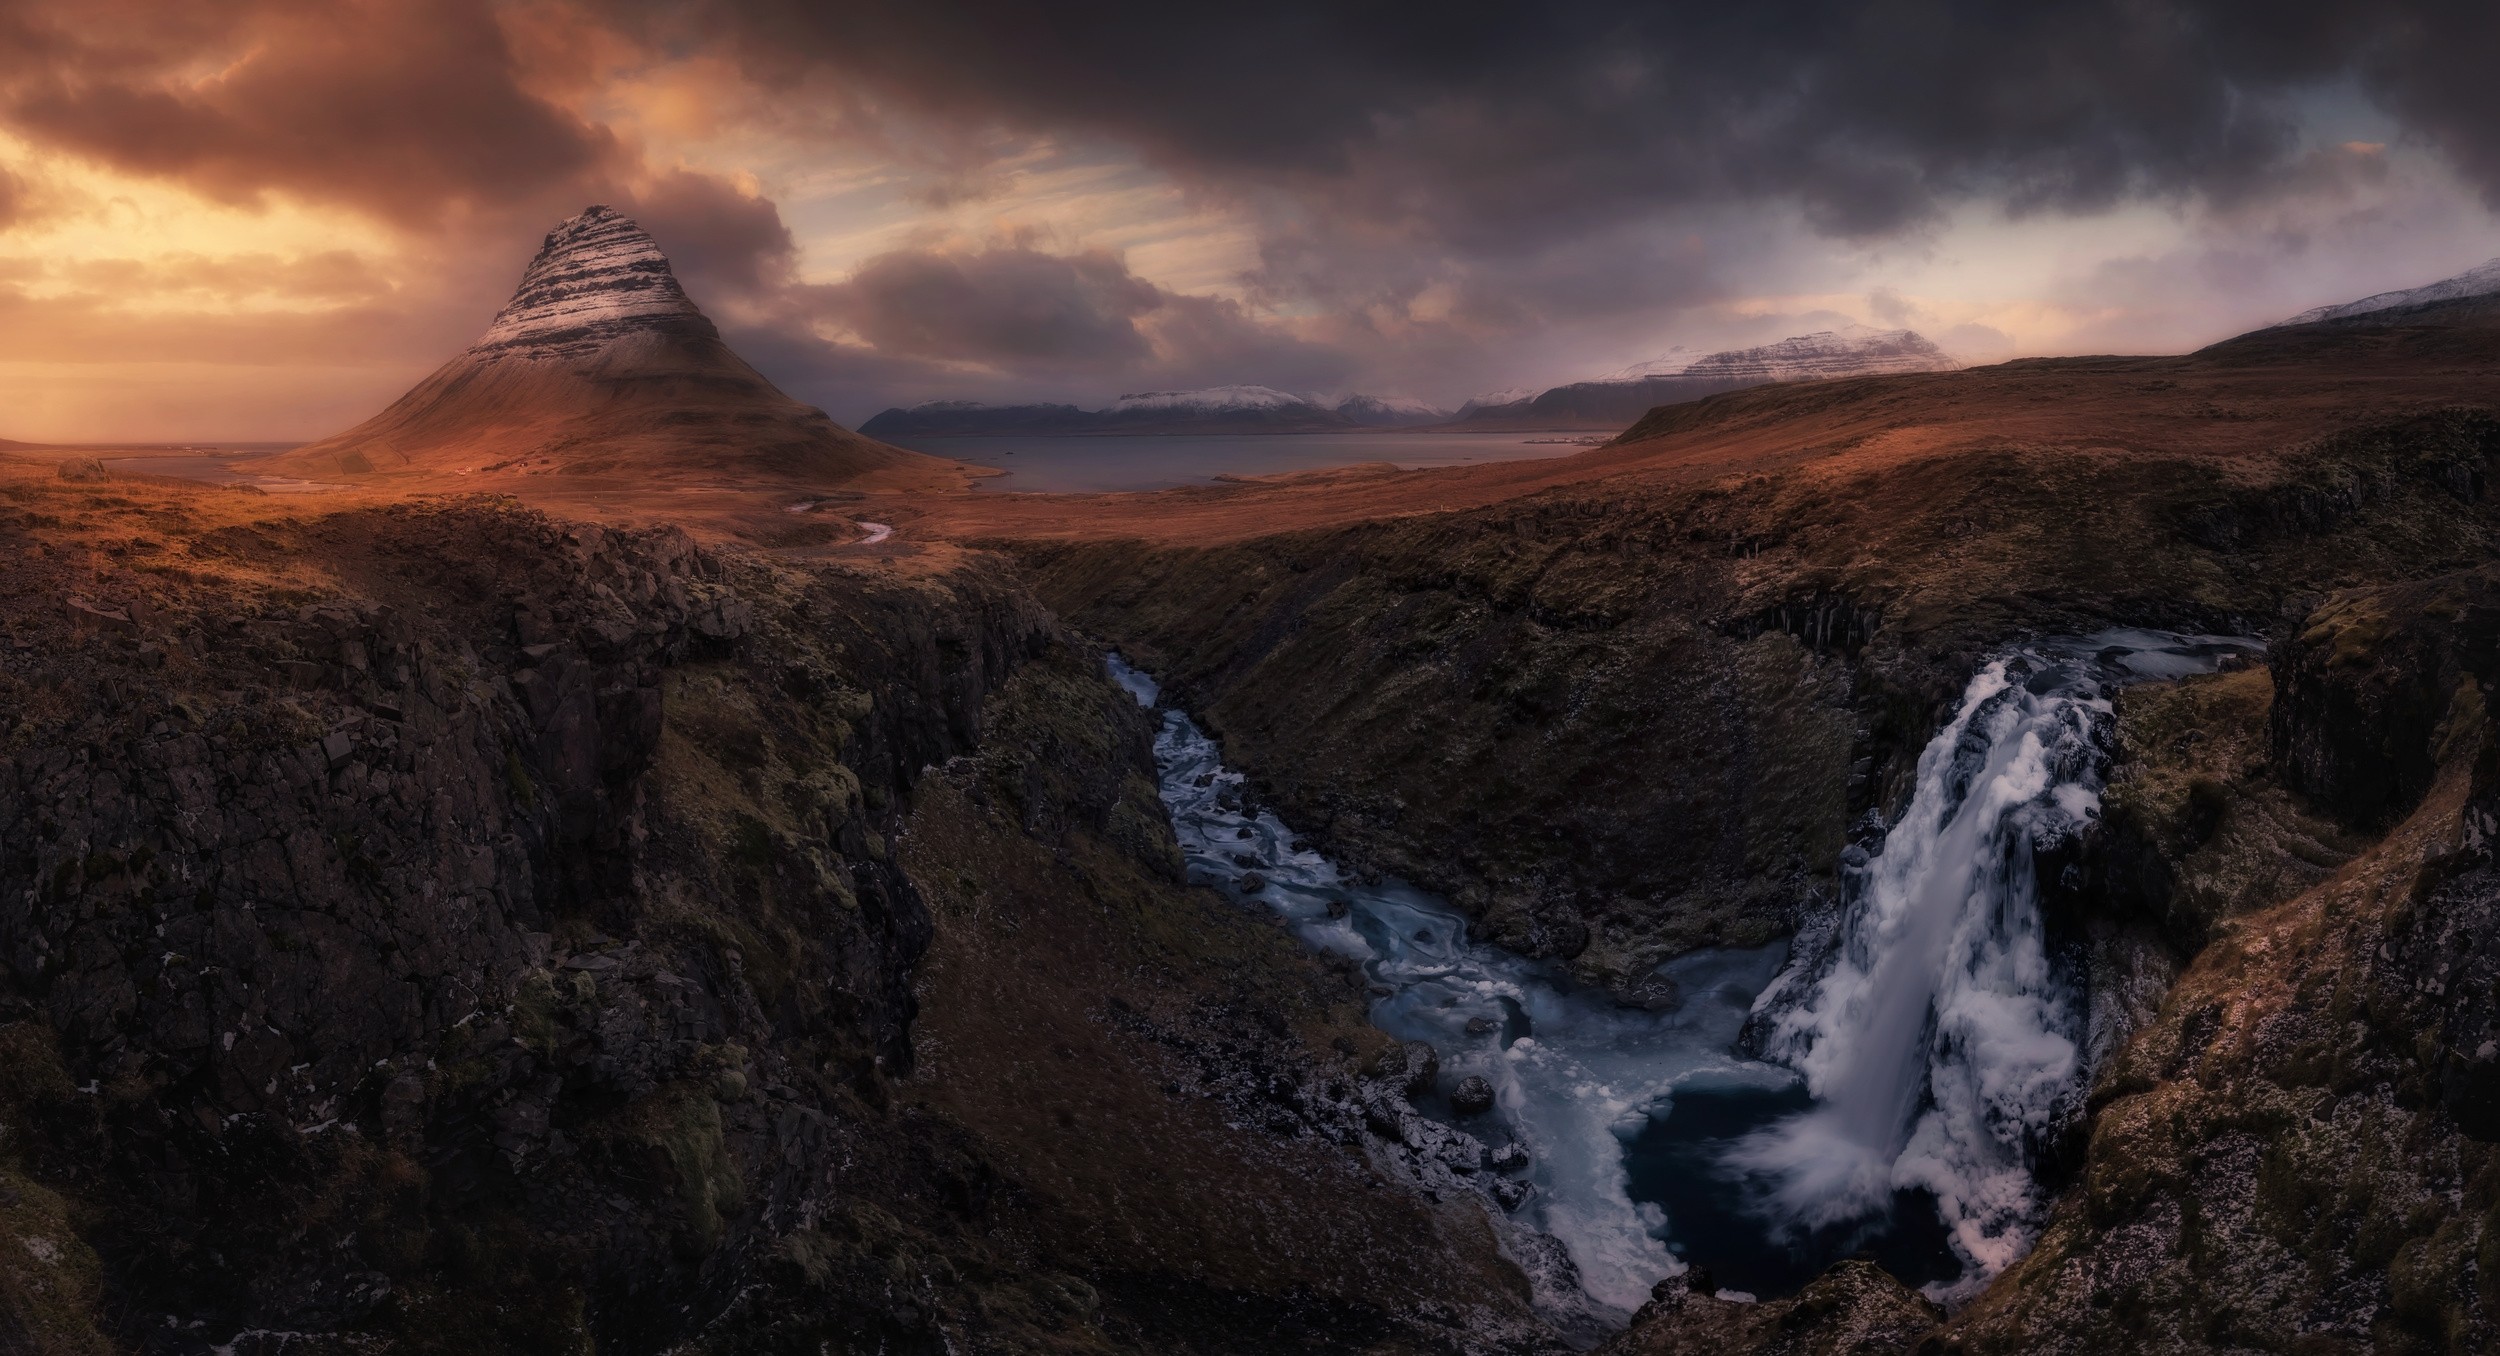 General 2500x1356 nature photography landscape mountains sunset waterfall river clouds road snowy peak Iceland